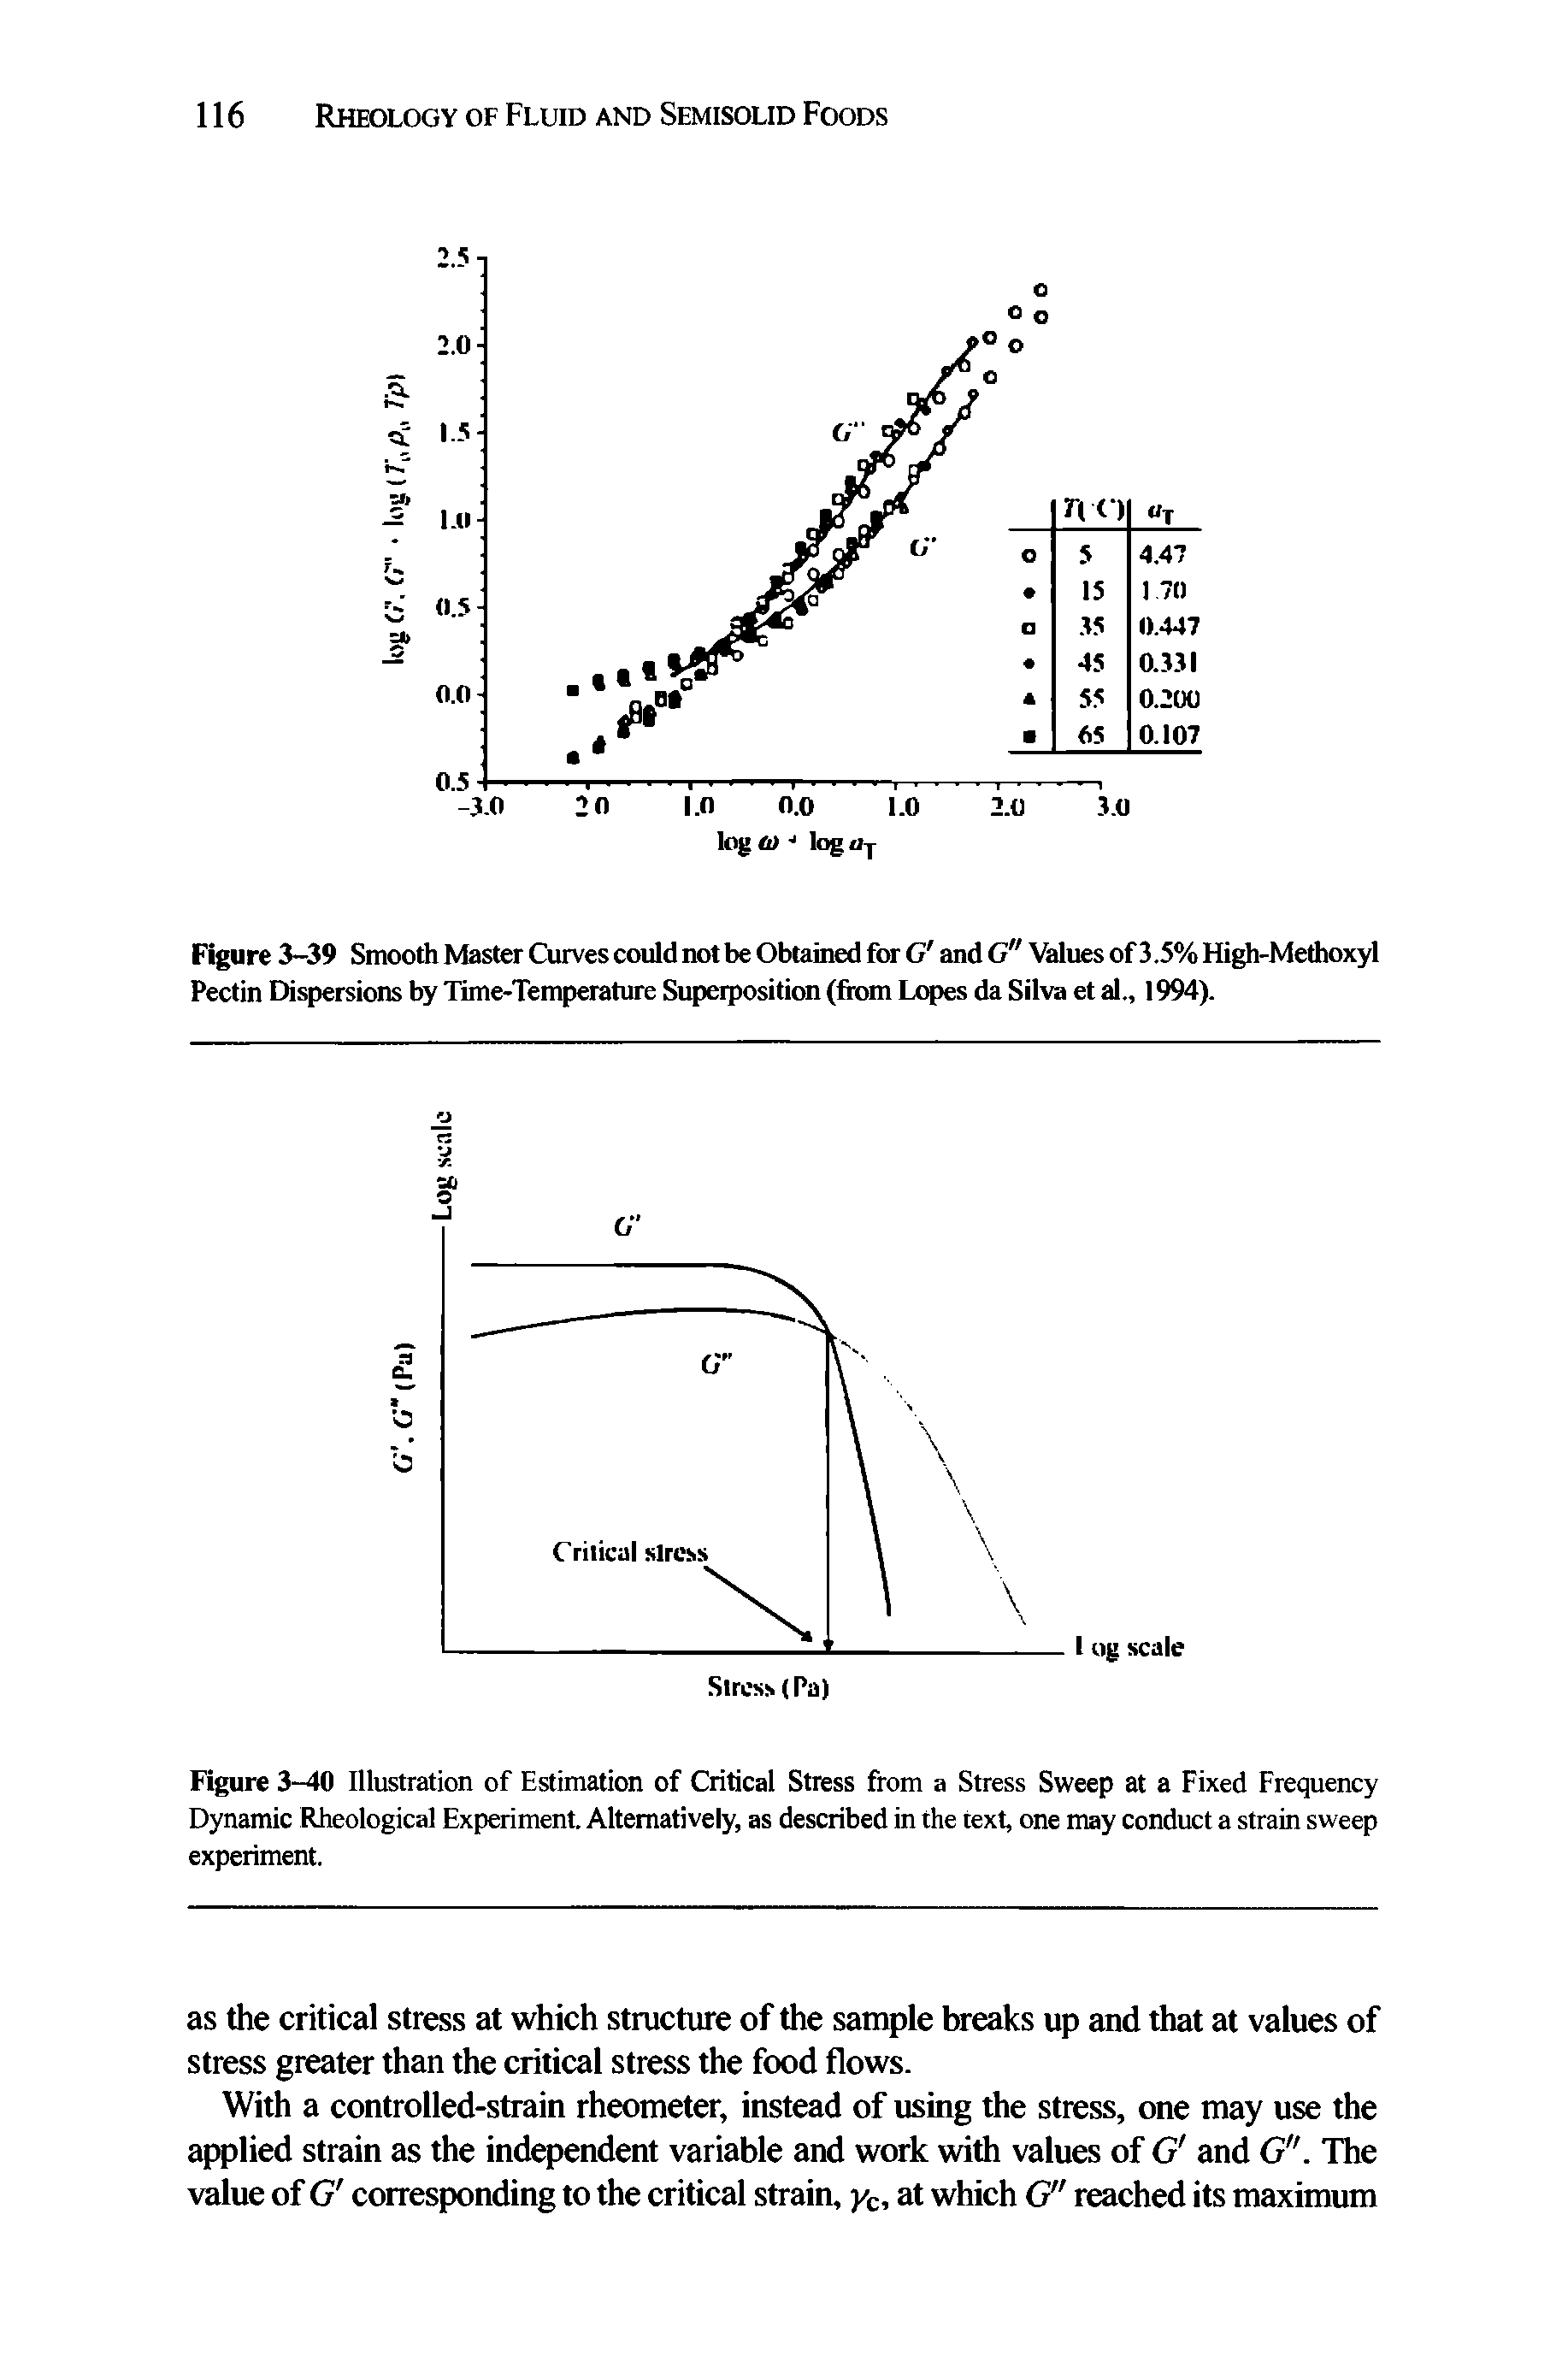 Figure 3-40 Illustration of Estimation of Critical Stress from a Stress Sweep at a Fixed Frequency Dynamic Rheological Experiment. Alternatively, as described in the text, one may conduct a strain sweep experiment.